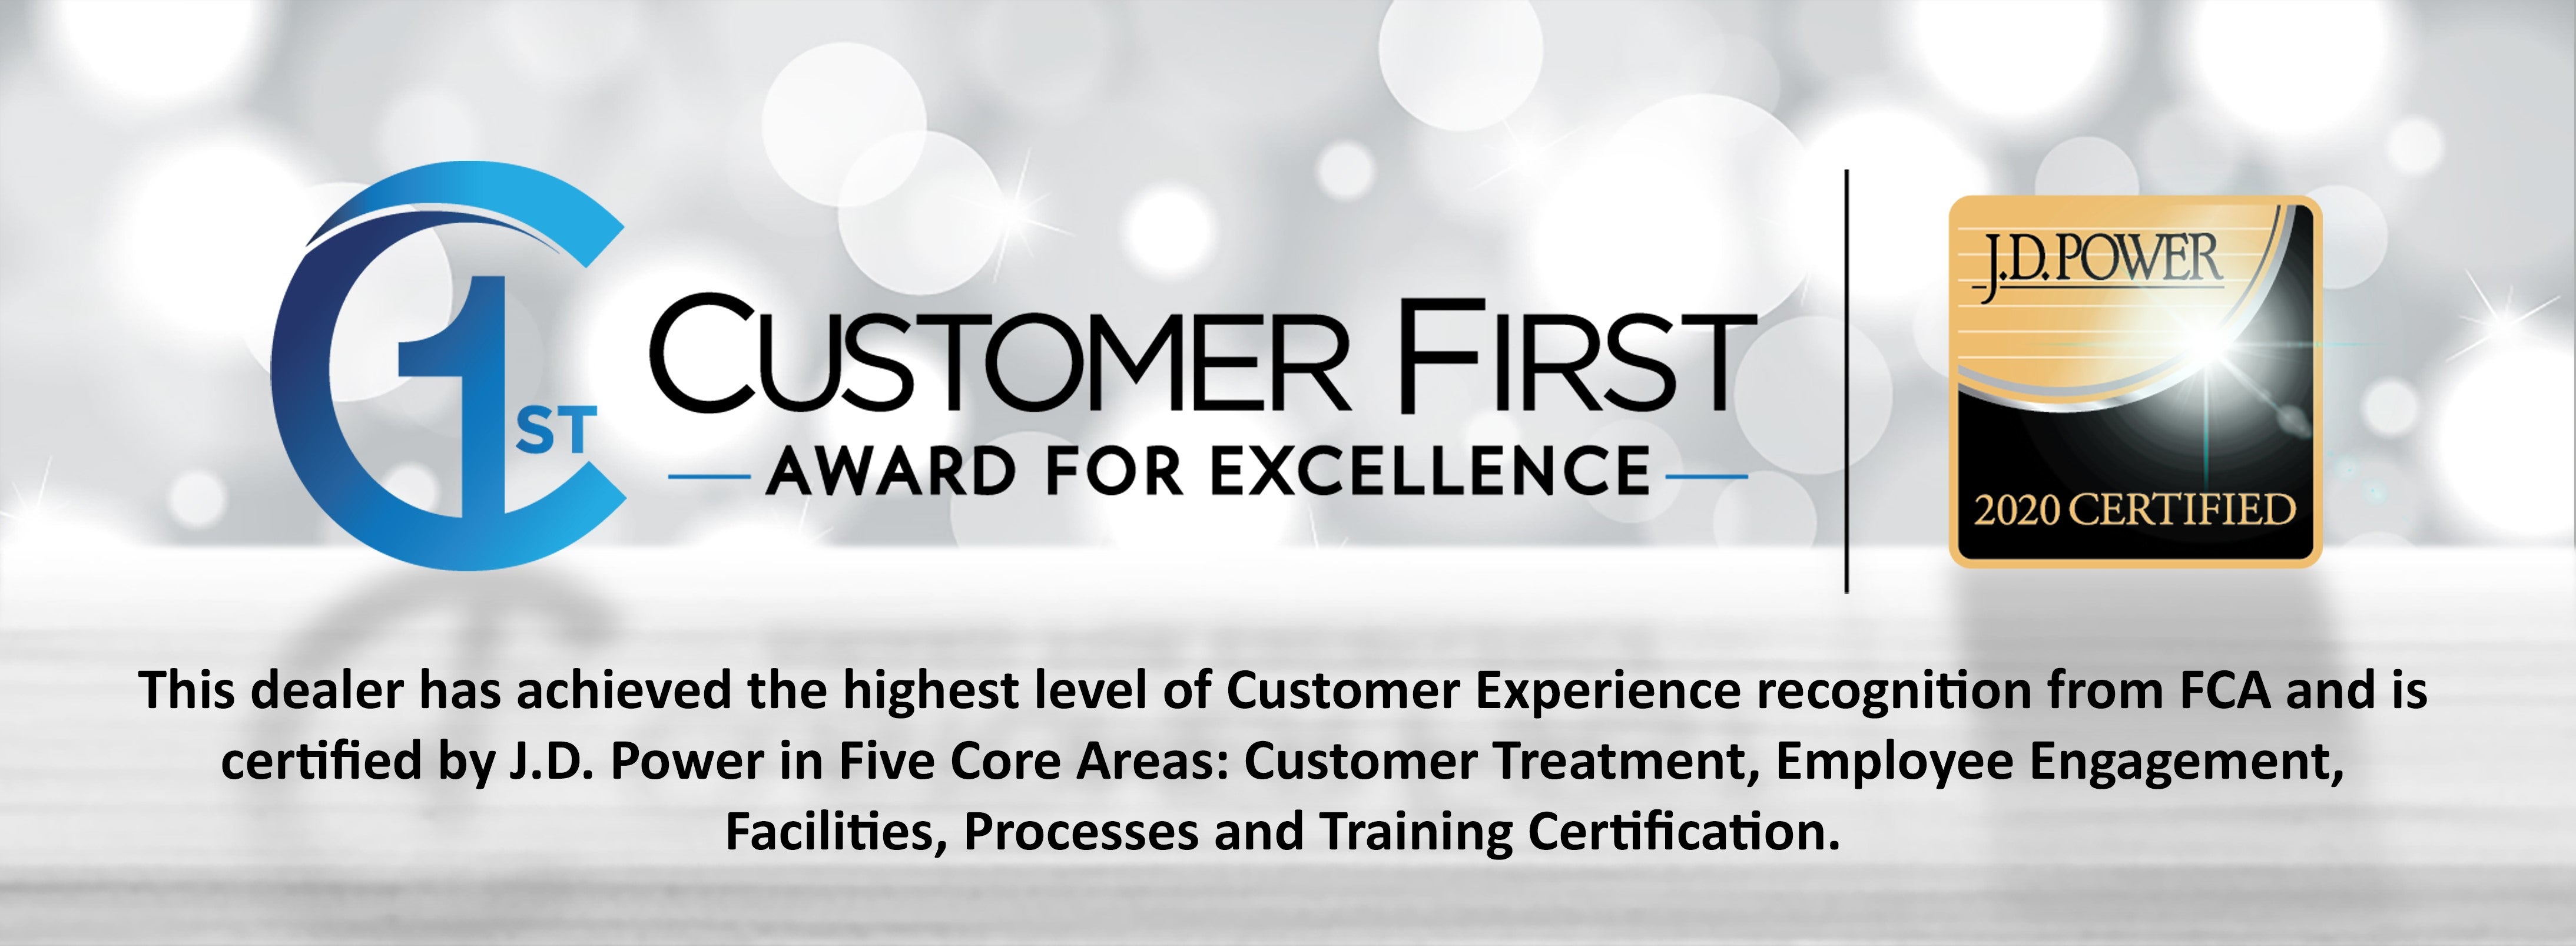 Customer First Award for Excellence for 2019 at Carville Chrysler Dodge Jeep Ram in Greeneville, TN